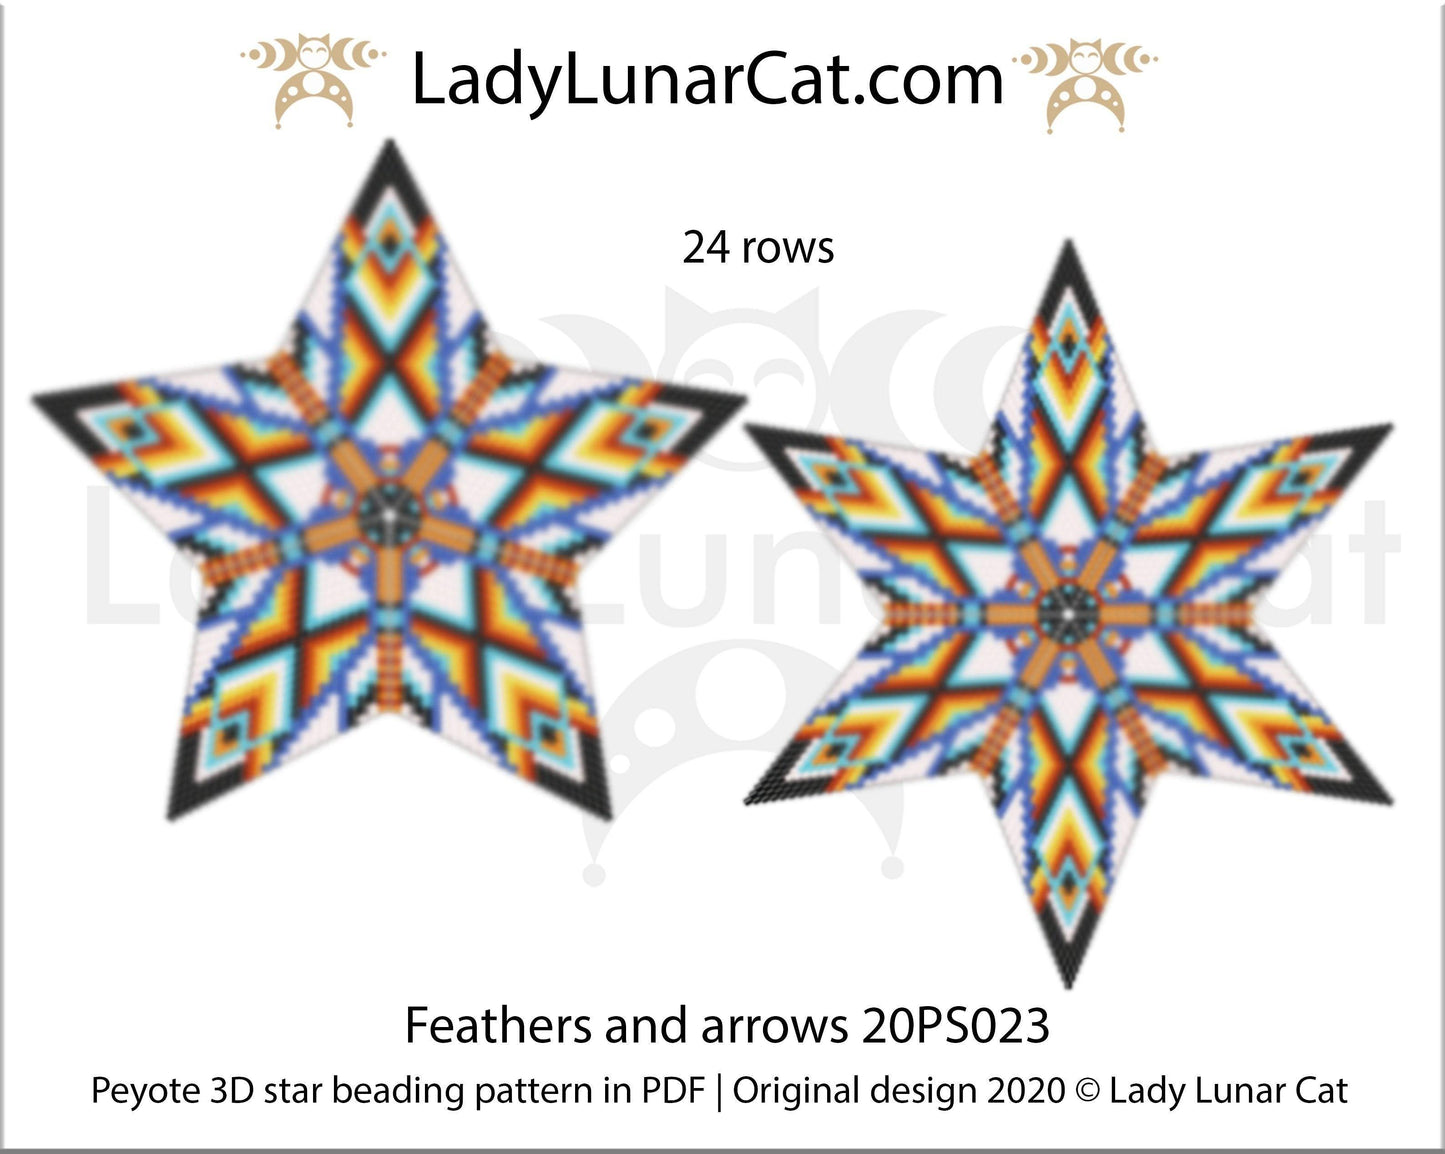 3d peyote star patterns for beading Feathers and arrows 20PS023 LadyLunarCat